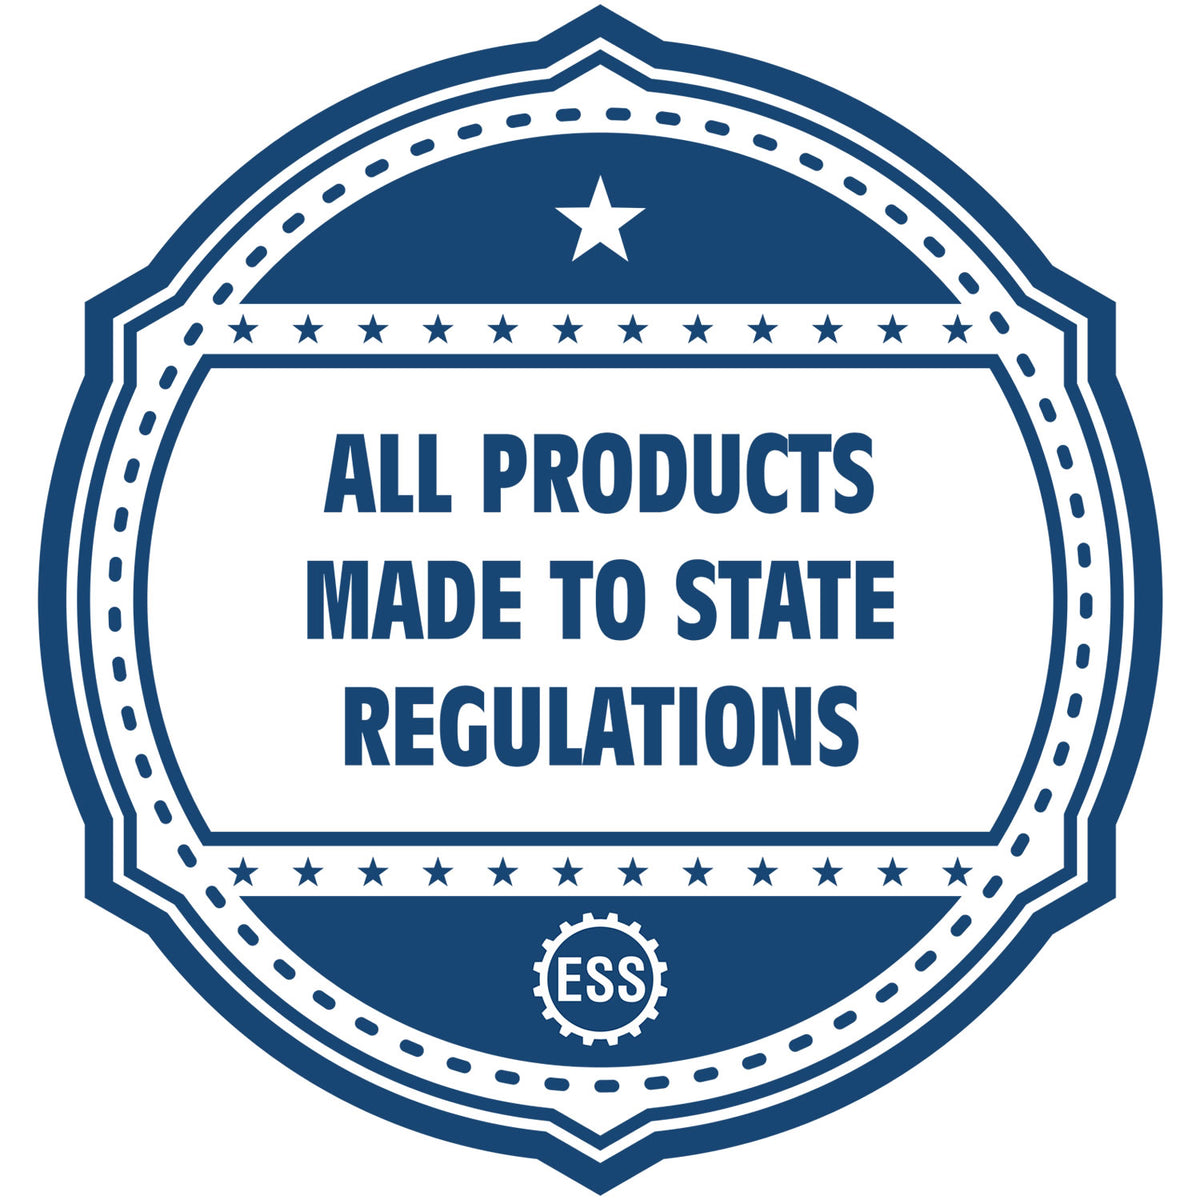 An icon or badge element for the Long Reach Iowa PE Seal showing that this product is made in compliance with state regulations.